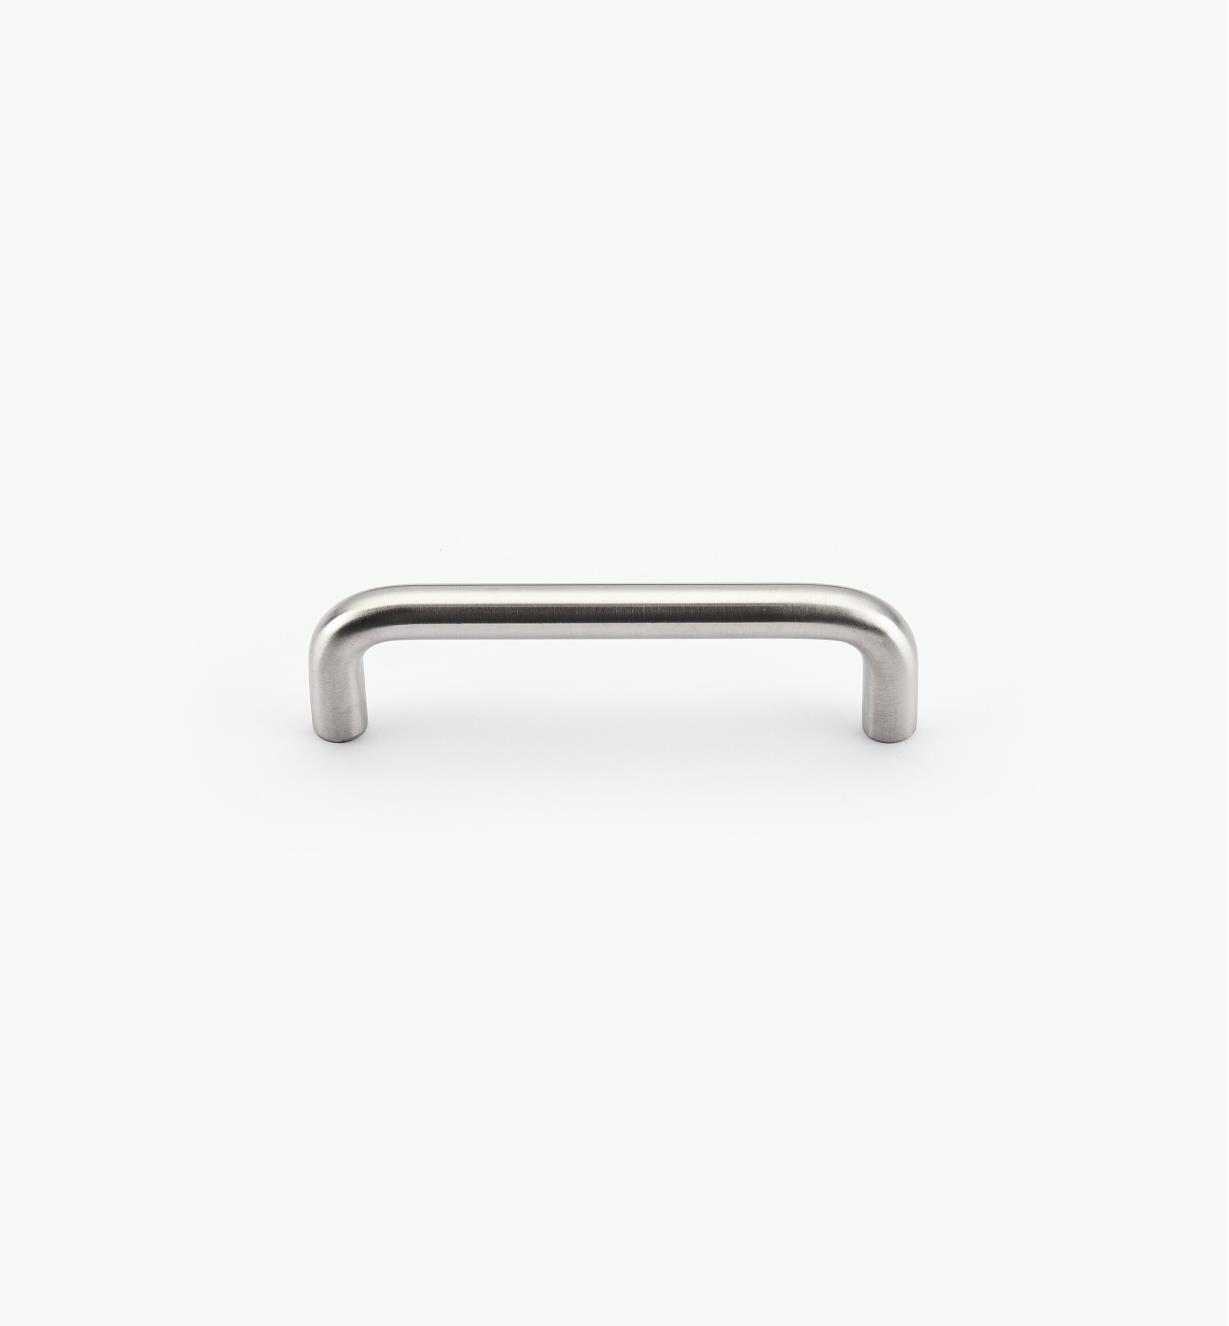 01W6855 - 10mm x 96mm Stainless-Steel Wire Pull